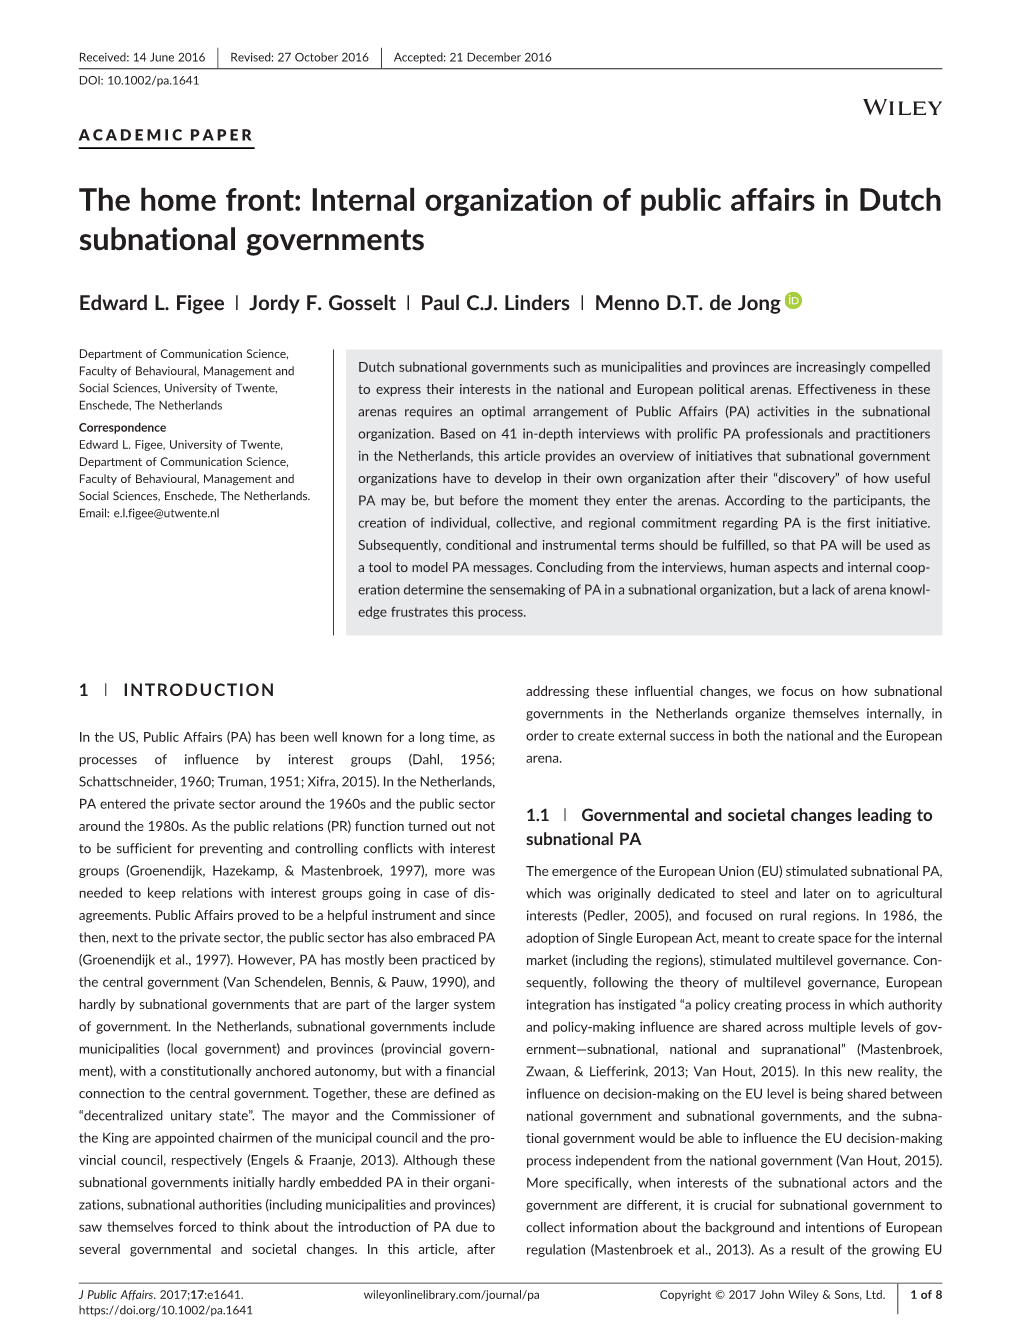 Internal Organization of Public Affairs in Dutch Subnational Governments